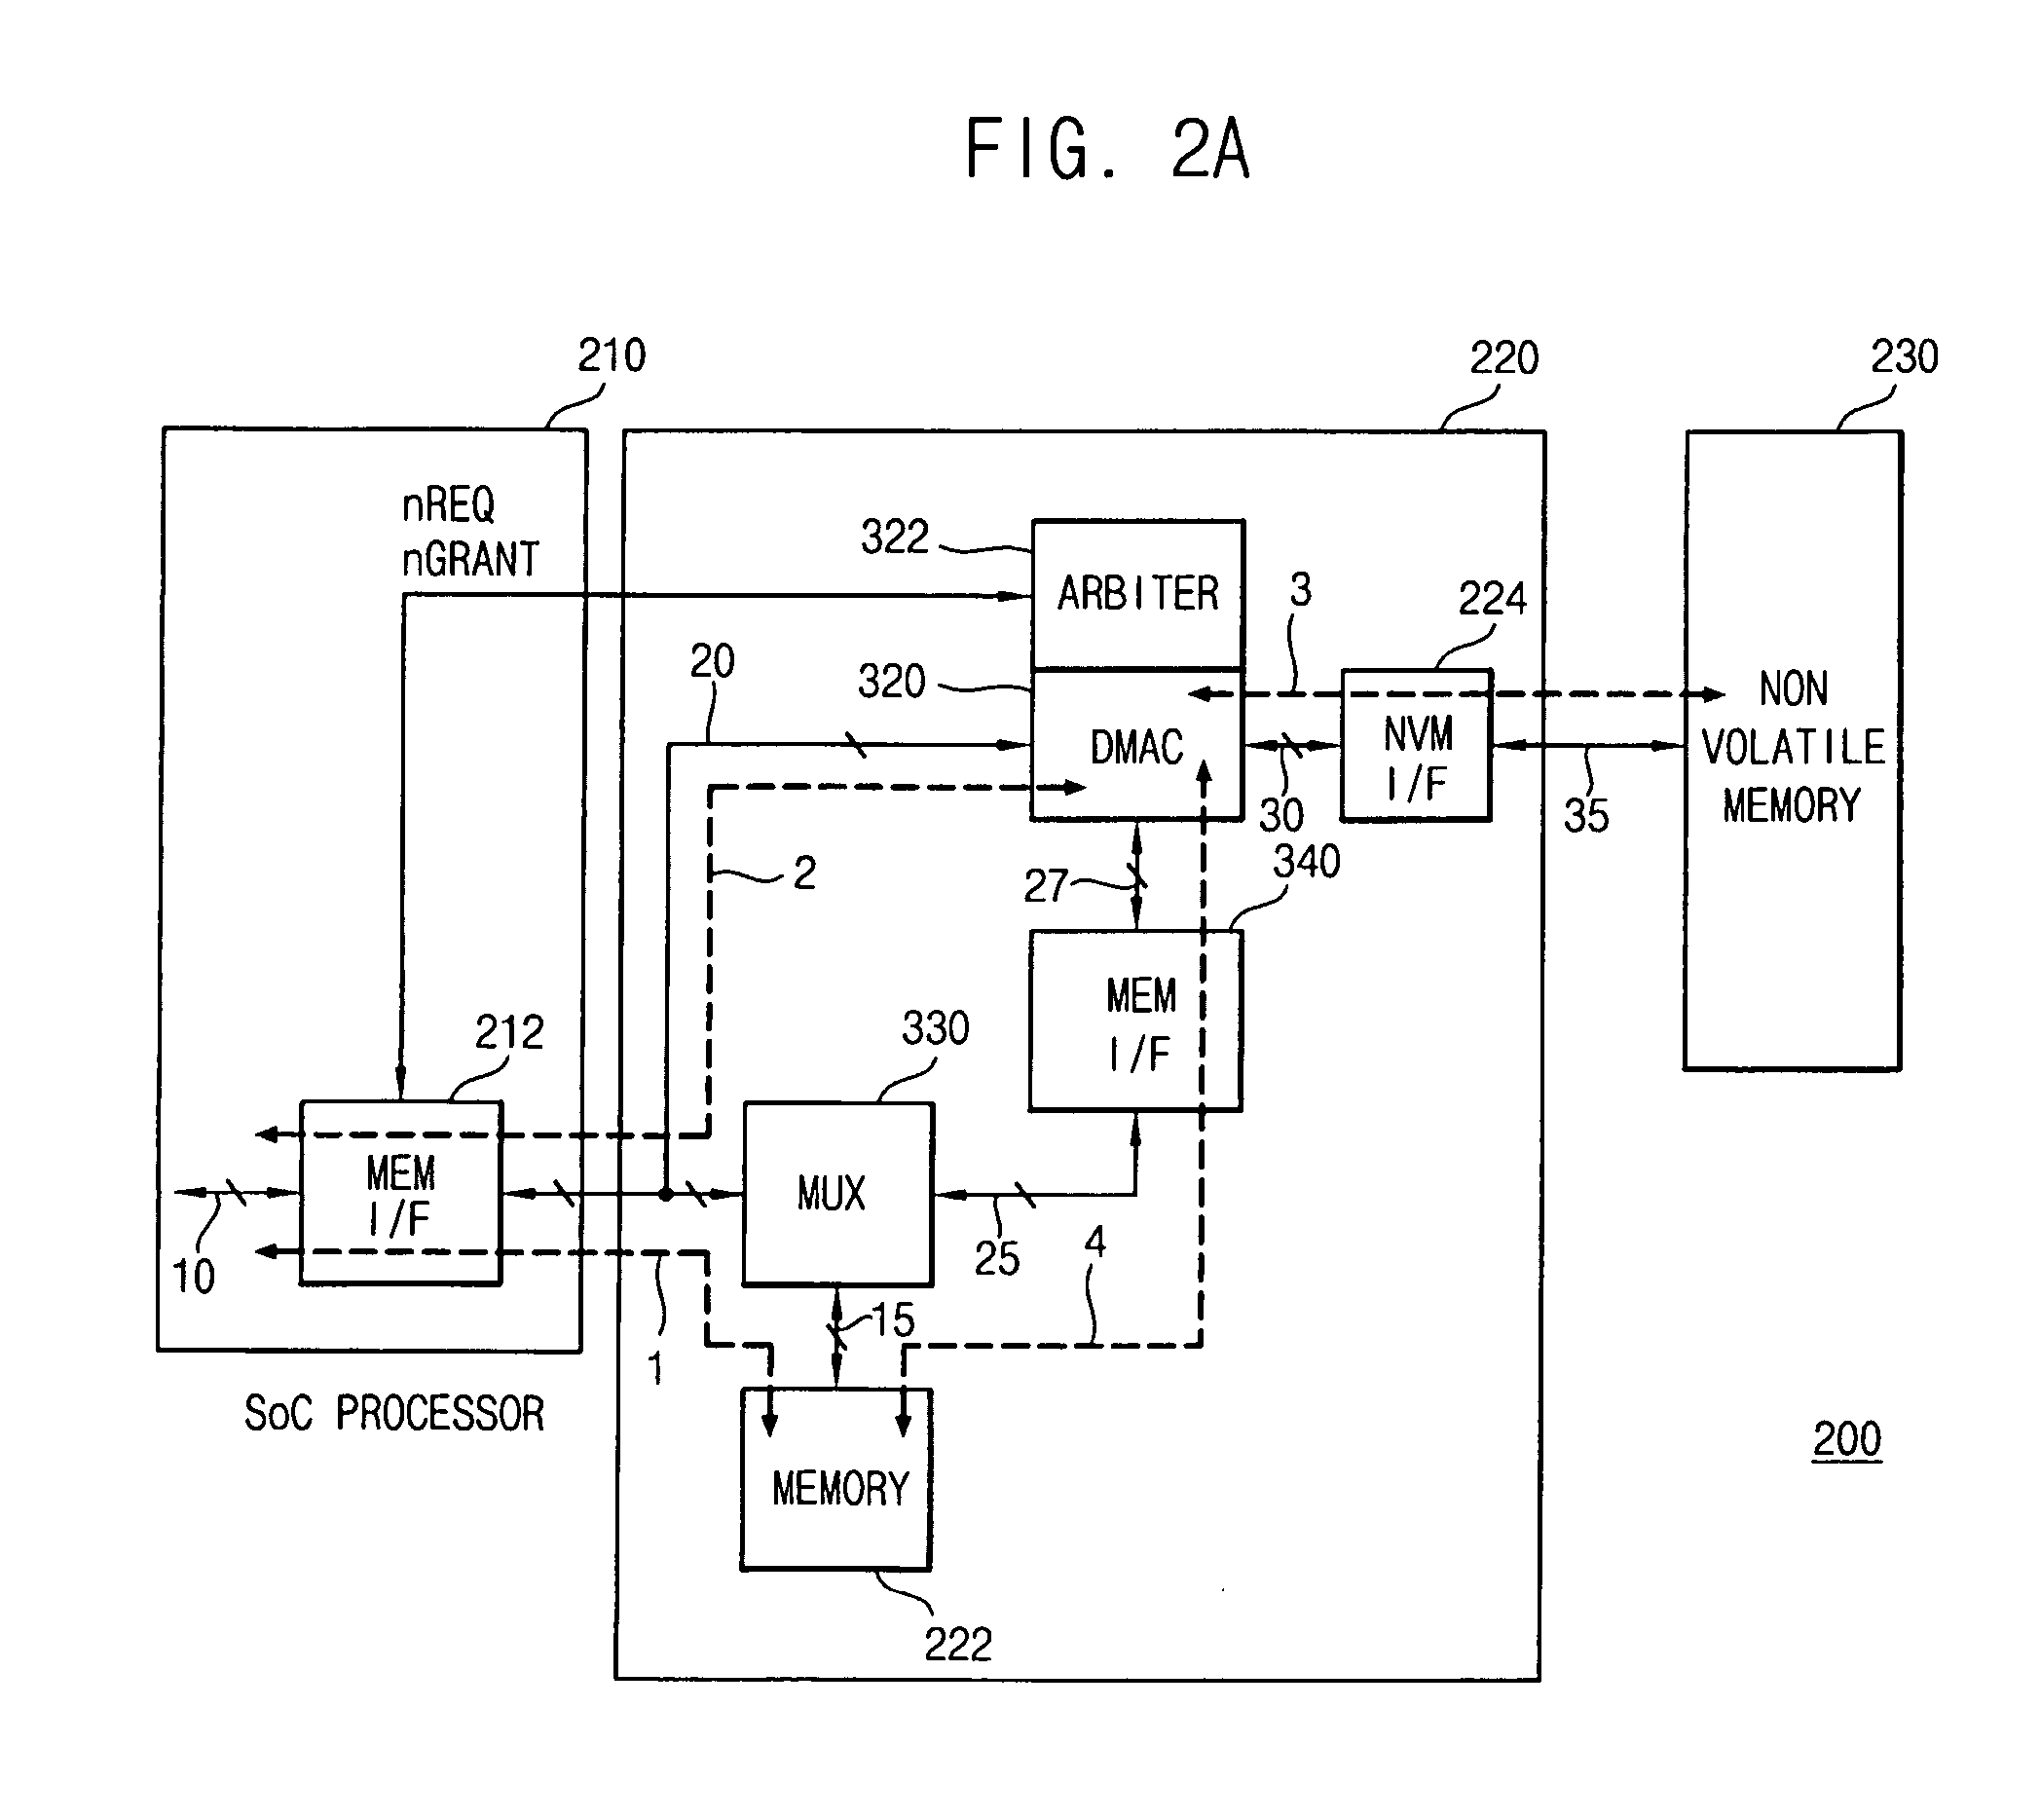 Microprocessor system with memory device including a DMAC, and a bus for DMA transfer of data between memory devices